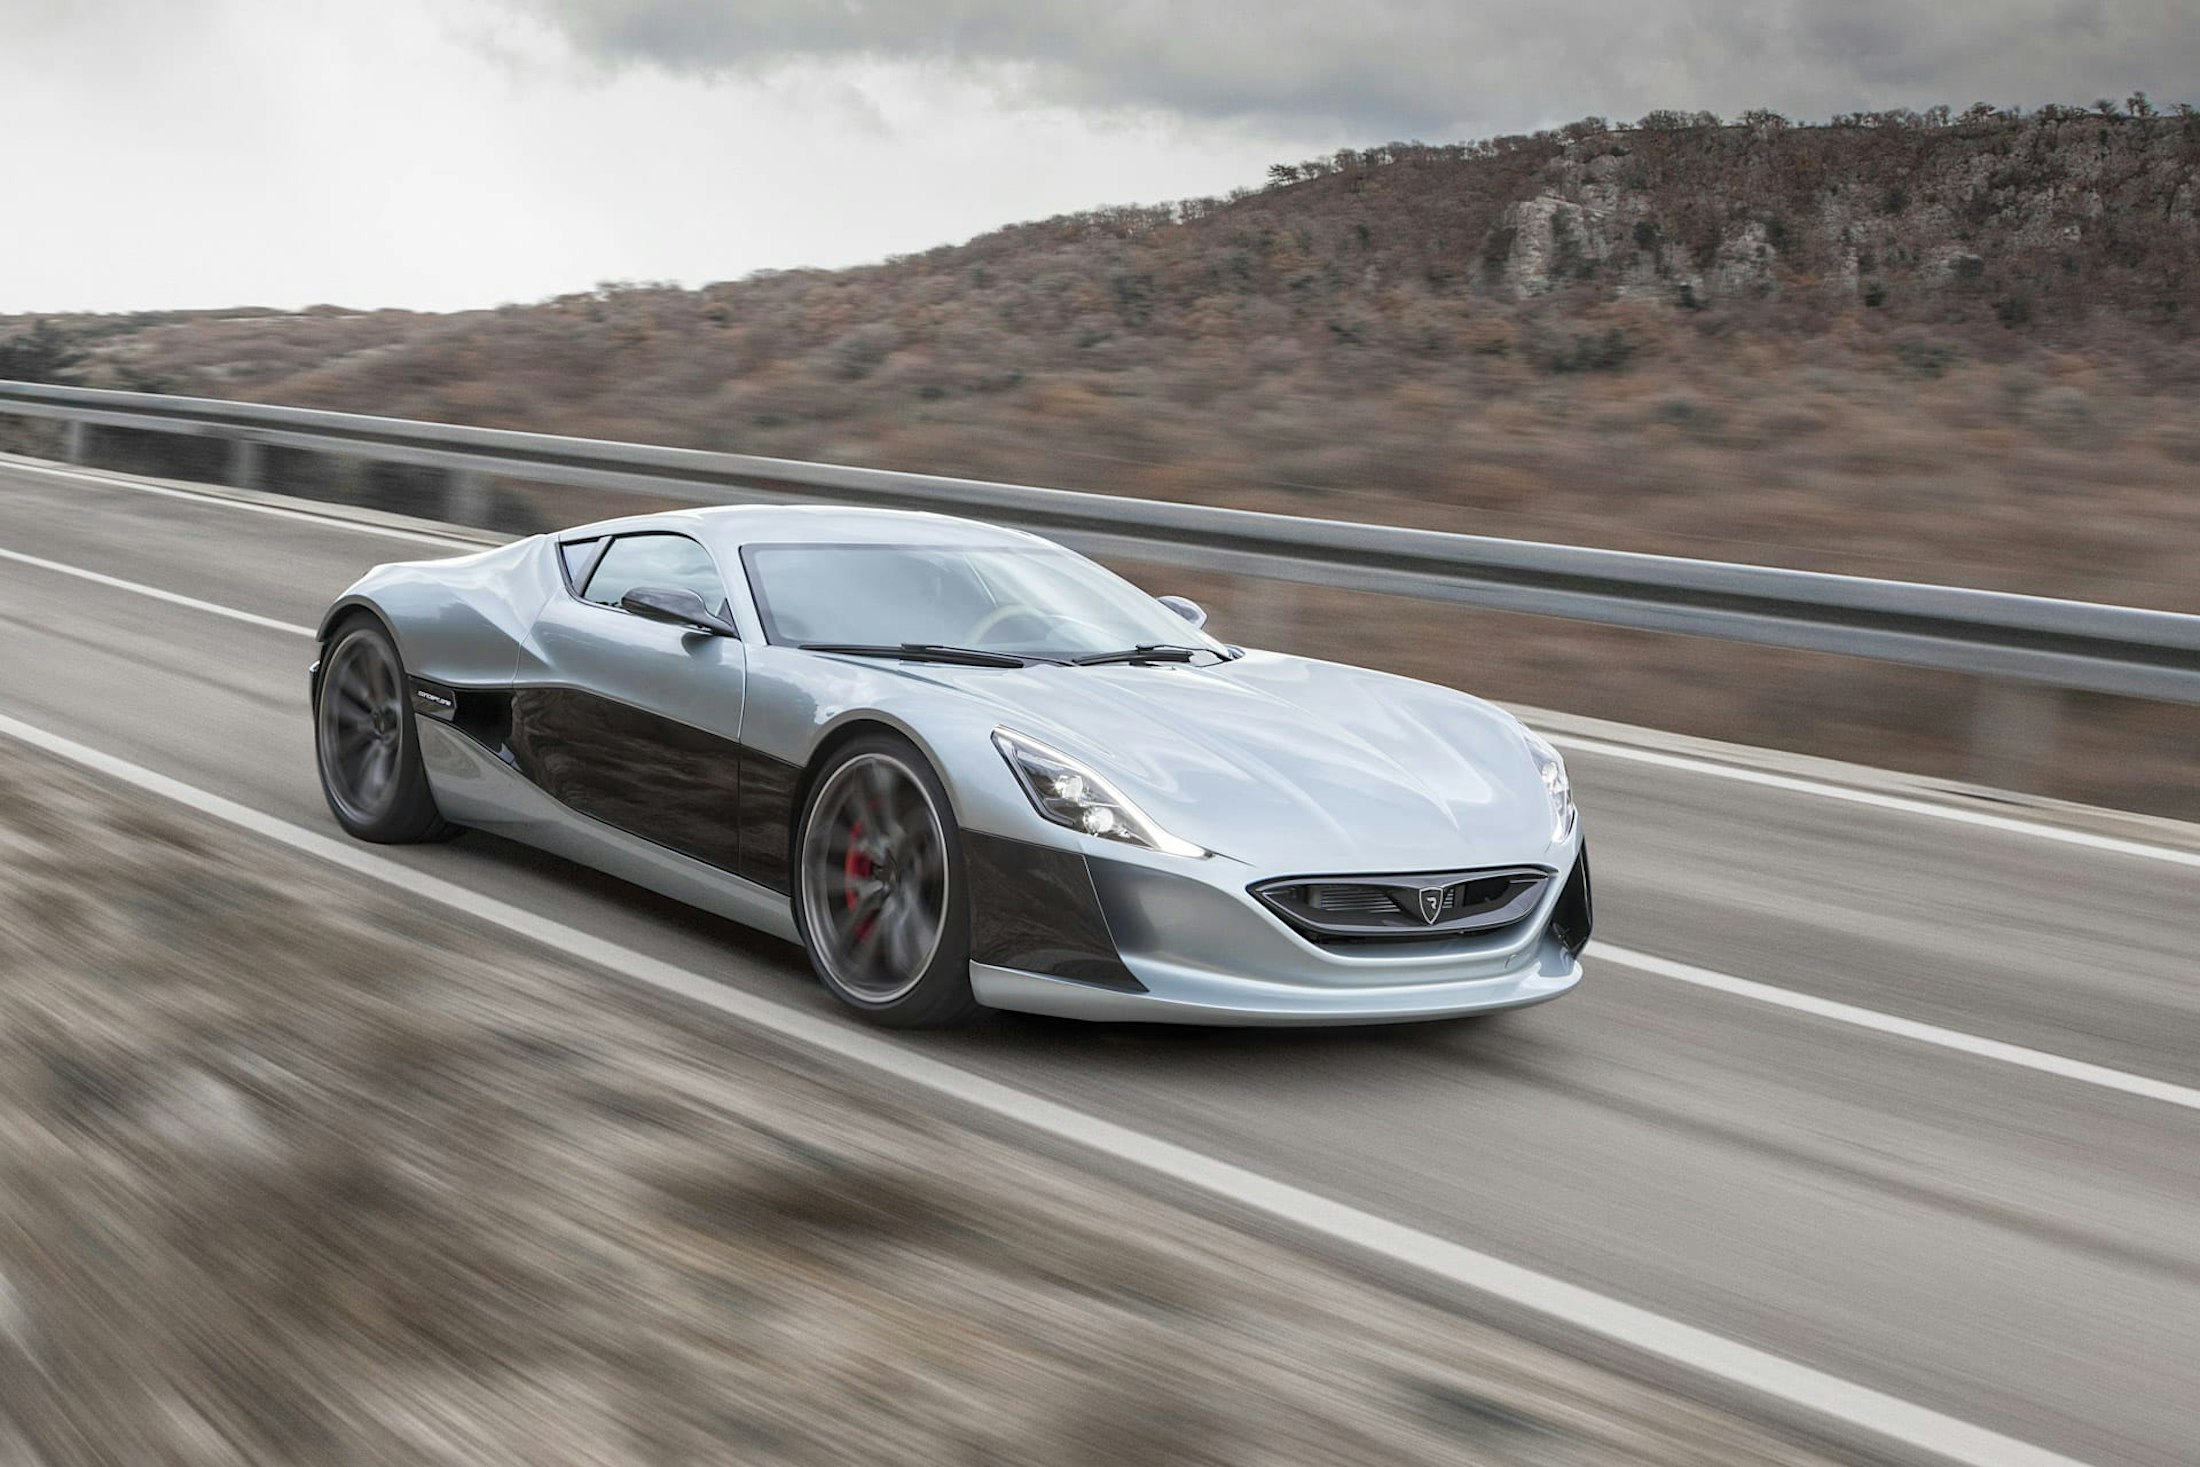 Rimac Automobili unveils the production version of the Concept_One at the Geneva Motor Show